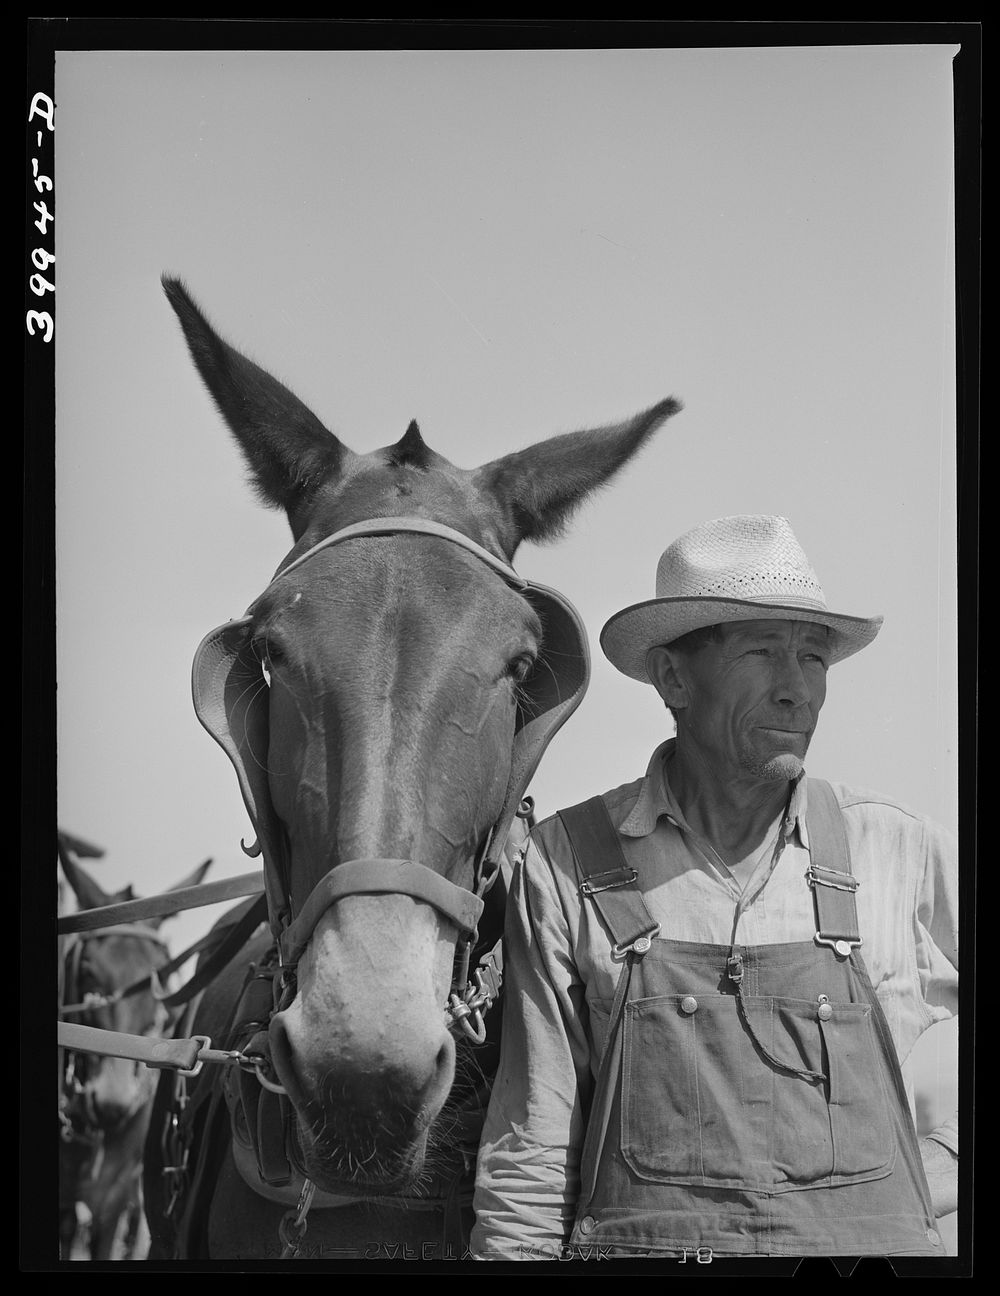 Mule skinner and one of the mules of the twenty mule team used to pull combine. Walla Walla County, Washington by Russell Lee